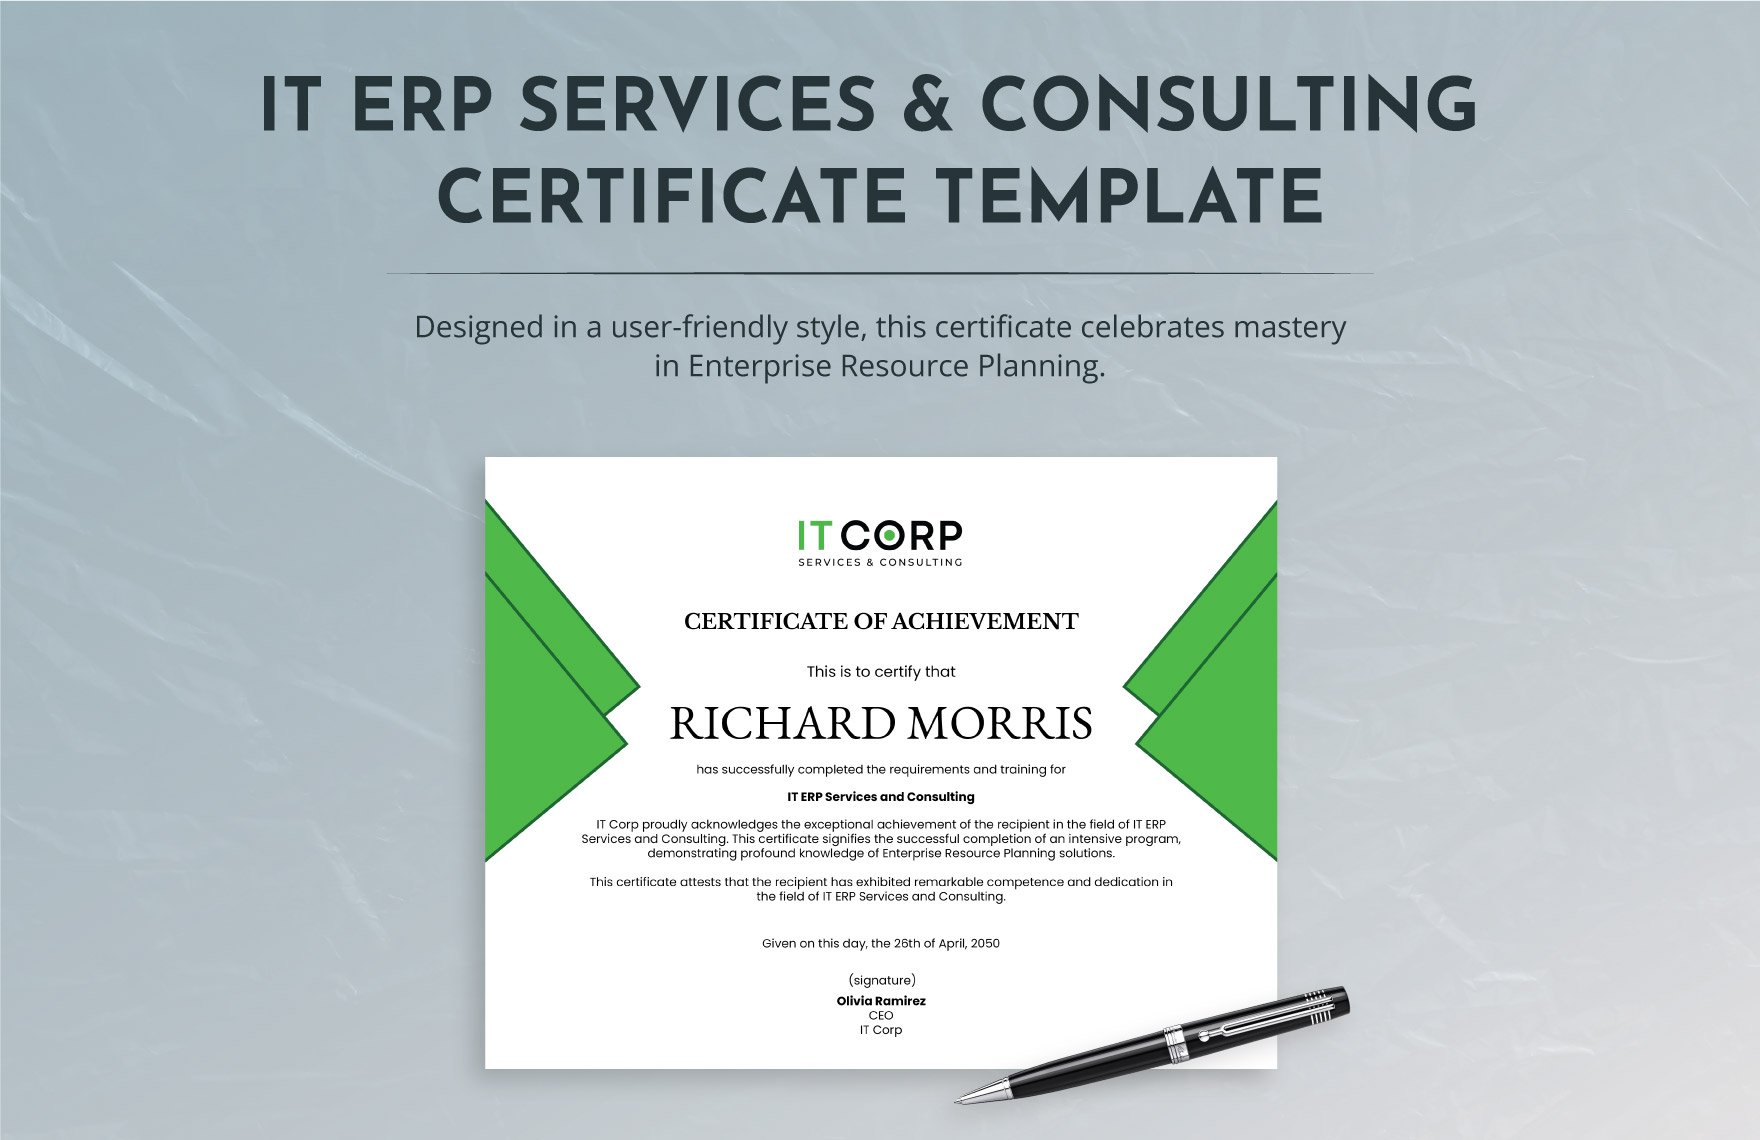 IT ERP Services & Consulting Certificate Template